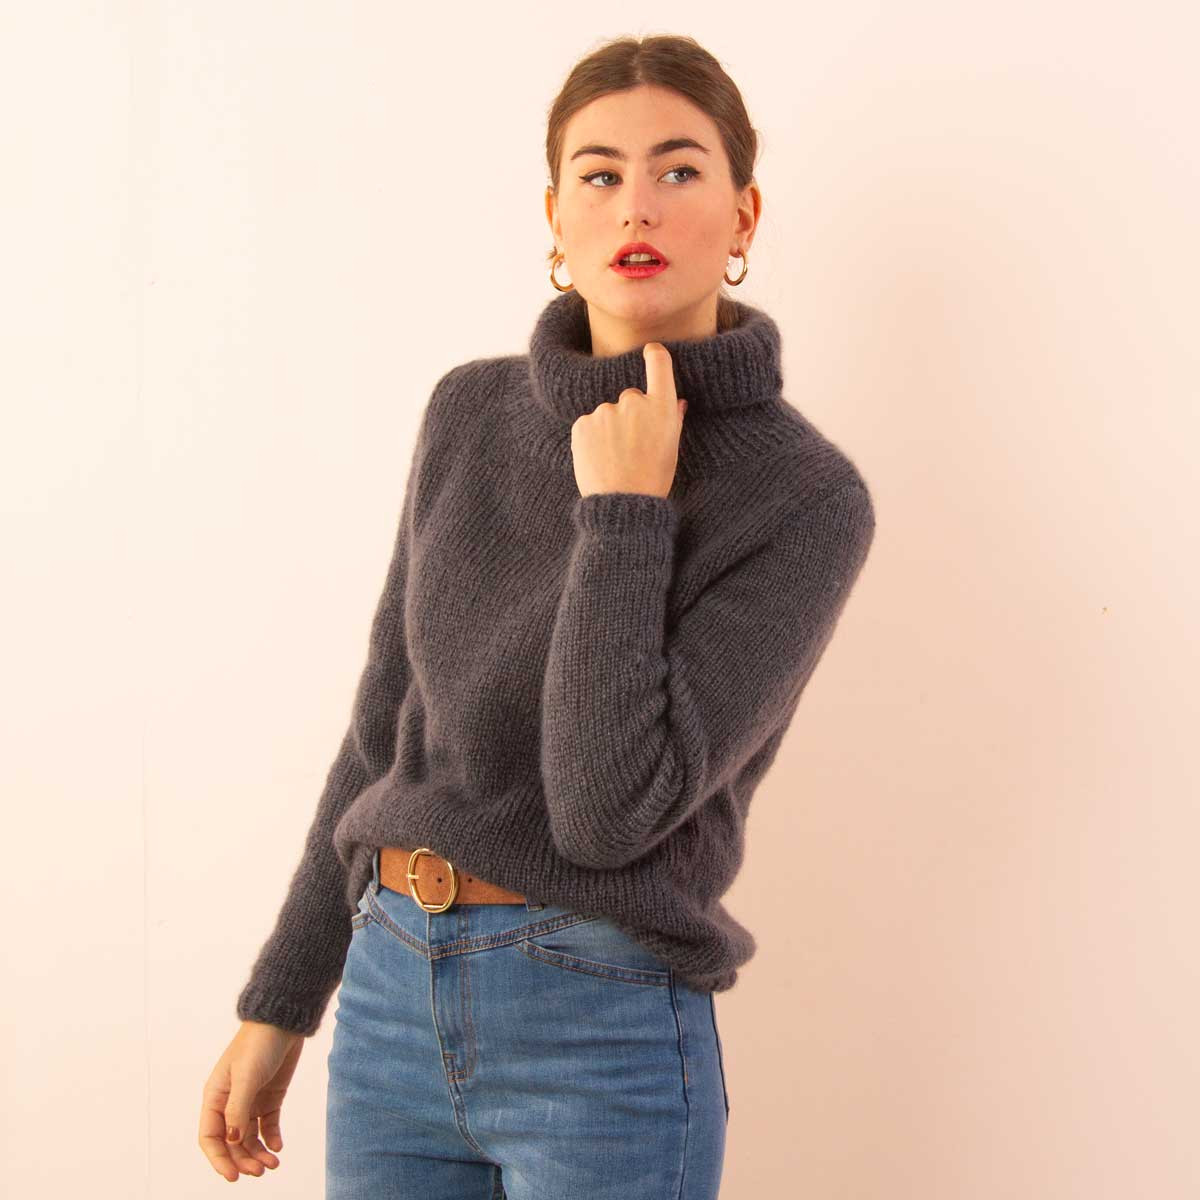 Colletia ready-to-knit sweater